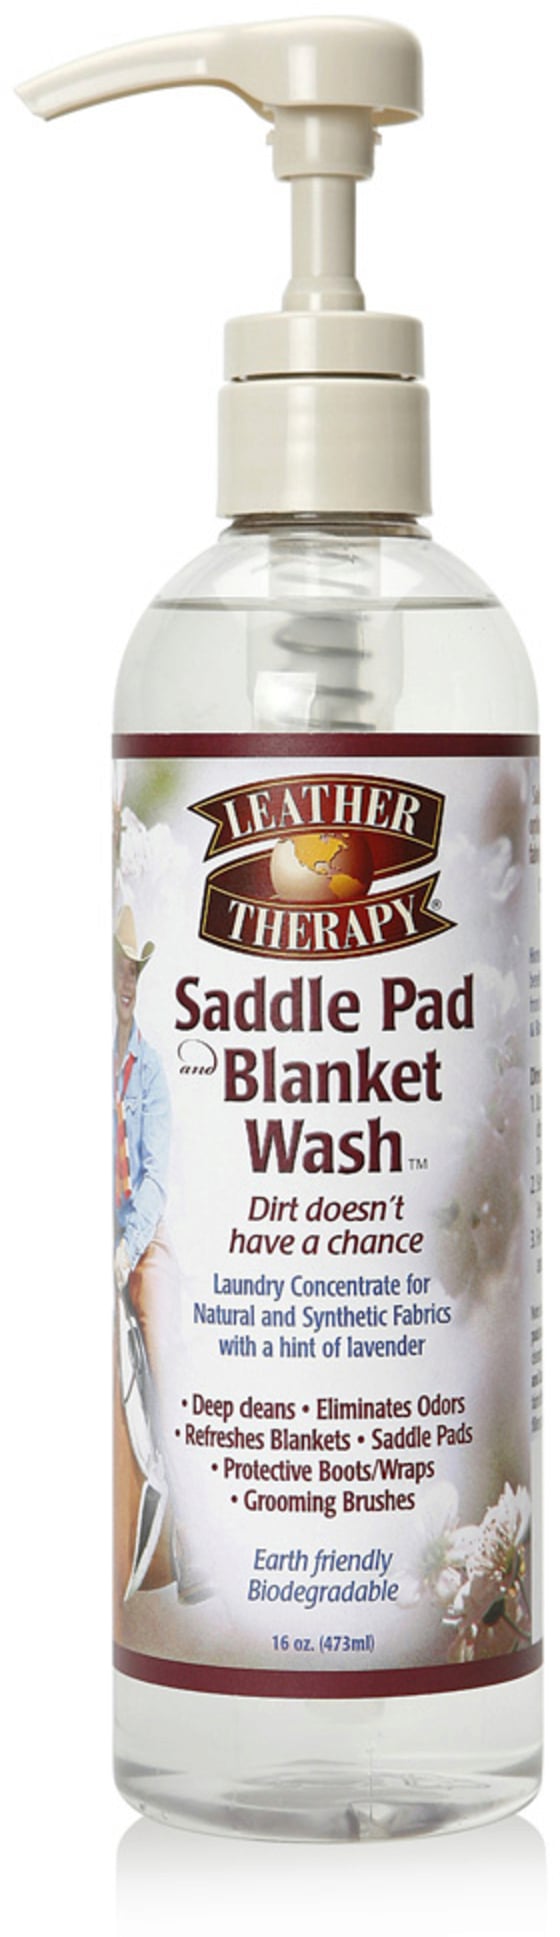 Leather Therapy Saddle Pad & Blanket Wash